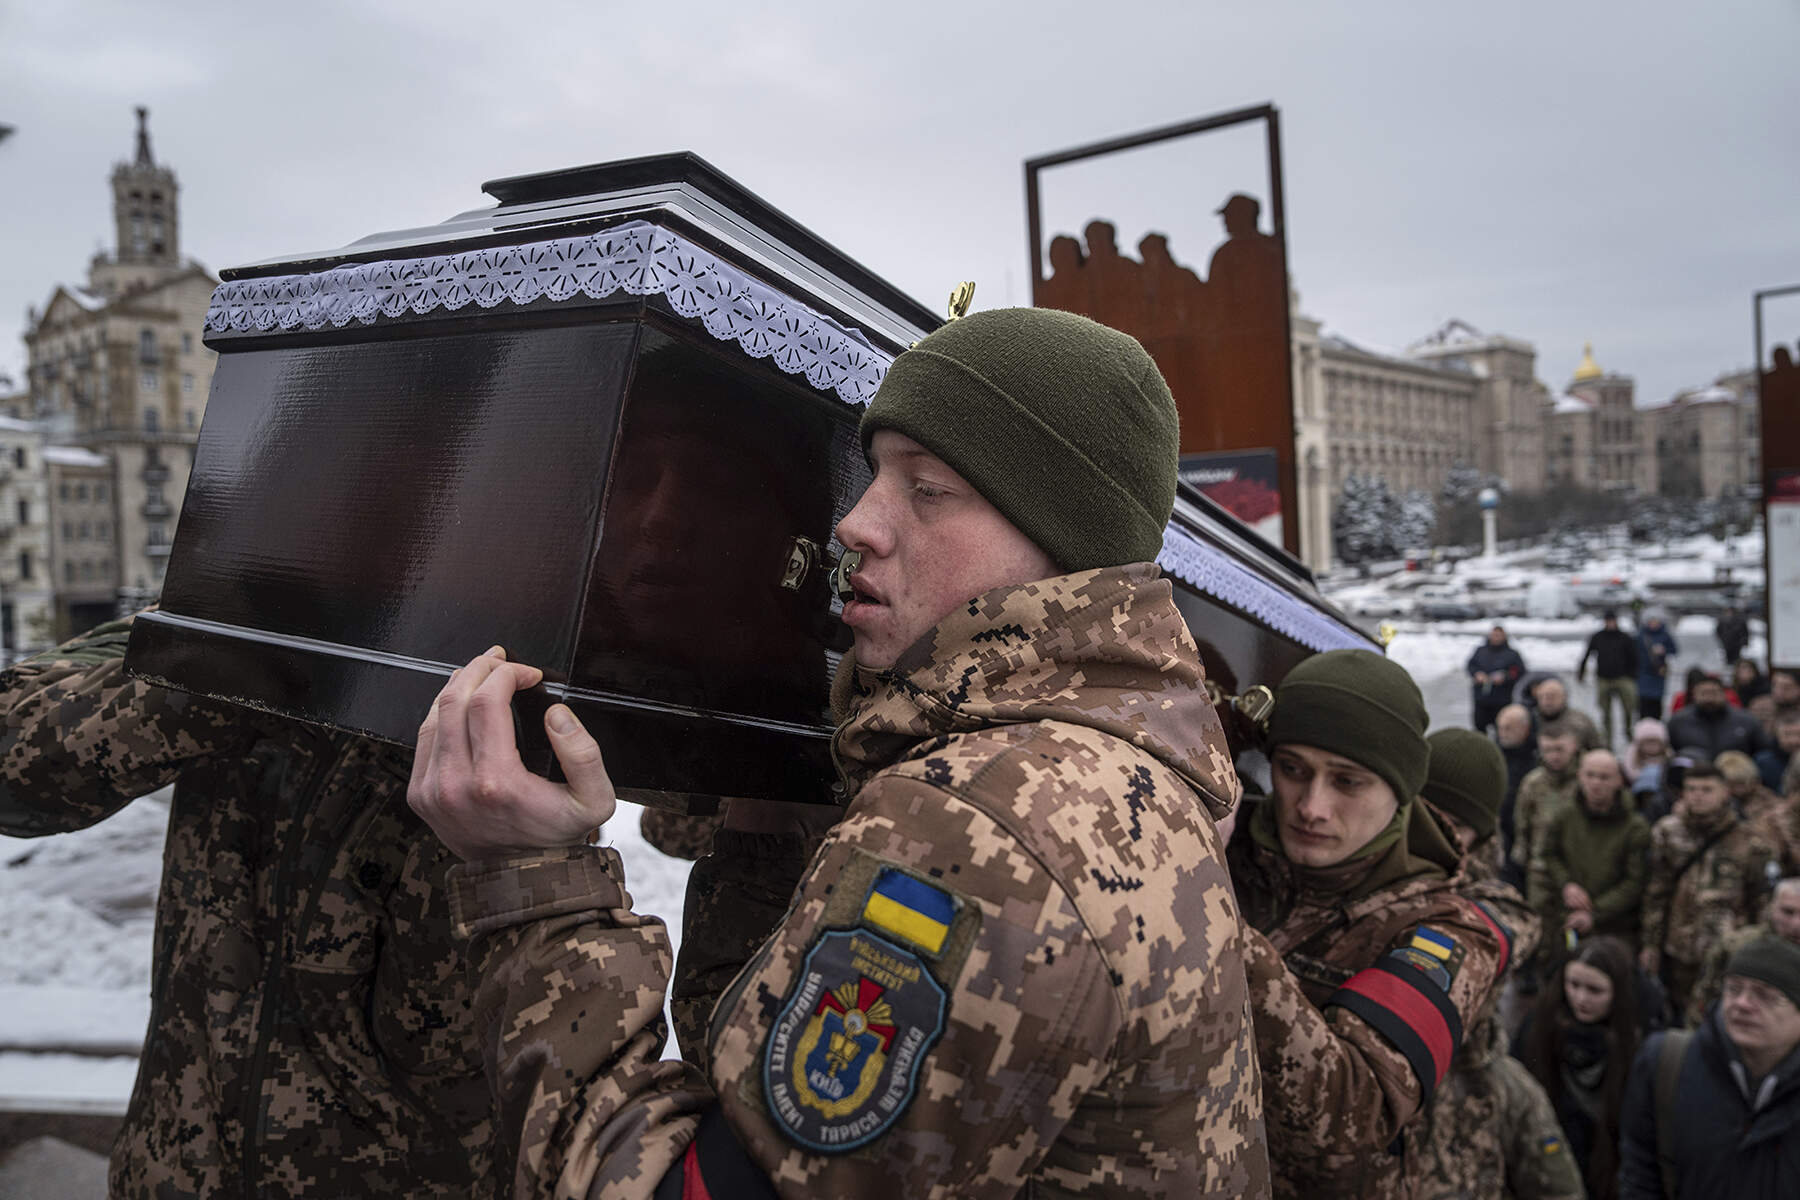 Honor guards carry the coffin of Andrii Trachuk, a Ukrainian serviceman, during his funeral service on Independence square in Kyiv, Ukraine, Friday, Dec. 15, 2023. Trachuk was a veteran of Revolution of Dignity and was killed by Russian forces on Dec. 9, 2023 near Kherson. (Evgeniy Maloletka/AP)